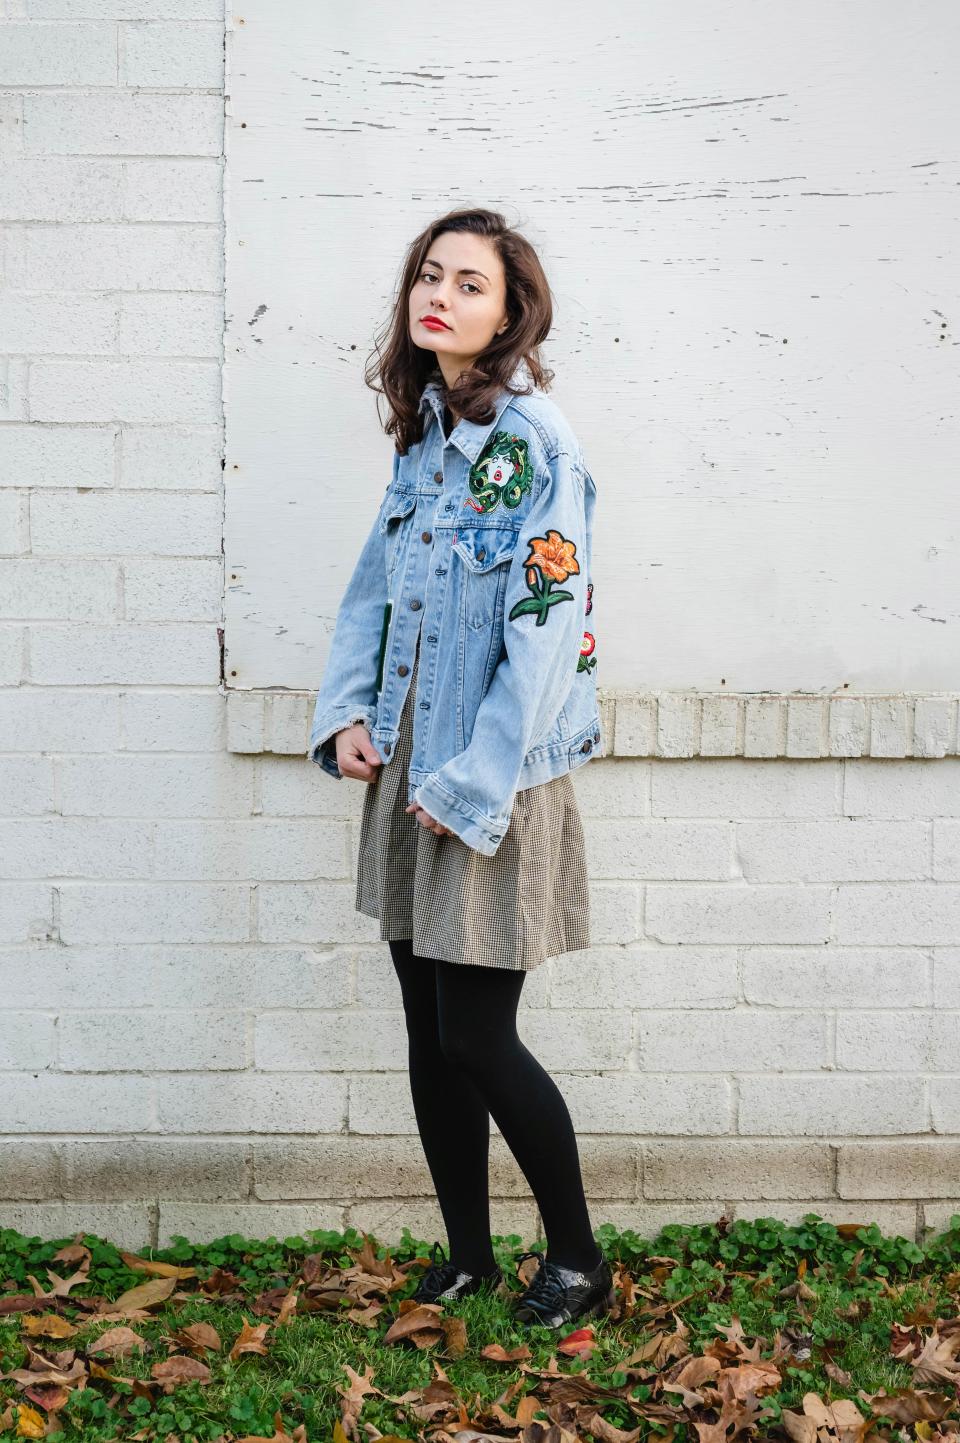 Billie Jean Denim jackets, produced in Beaver, are sold at Cord + Iron. [April Ohl Photography]